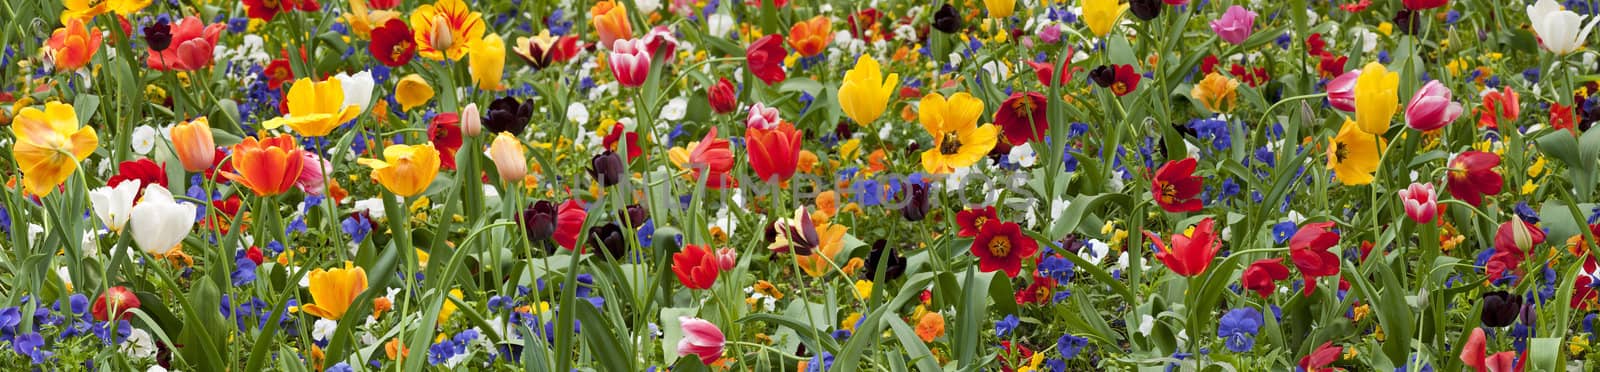 Colorful tulip flowers in Spring